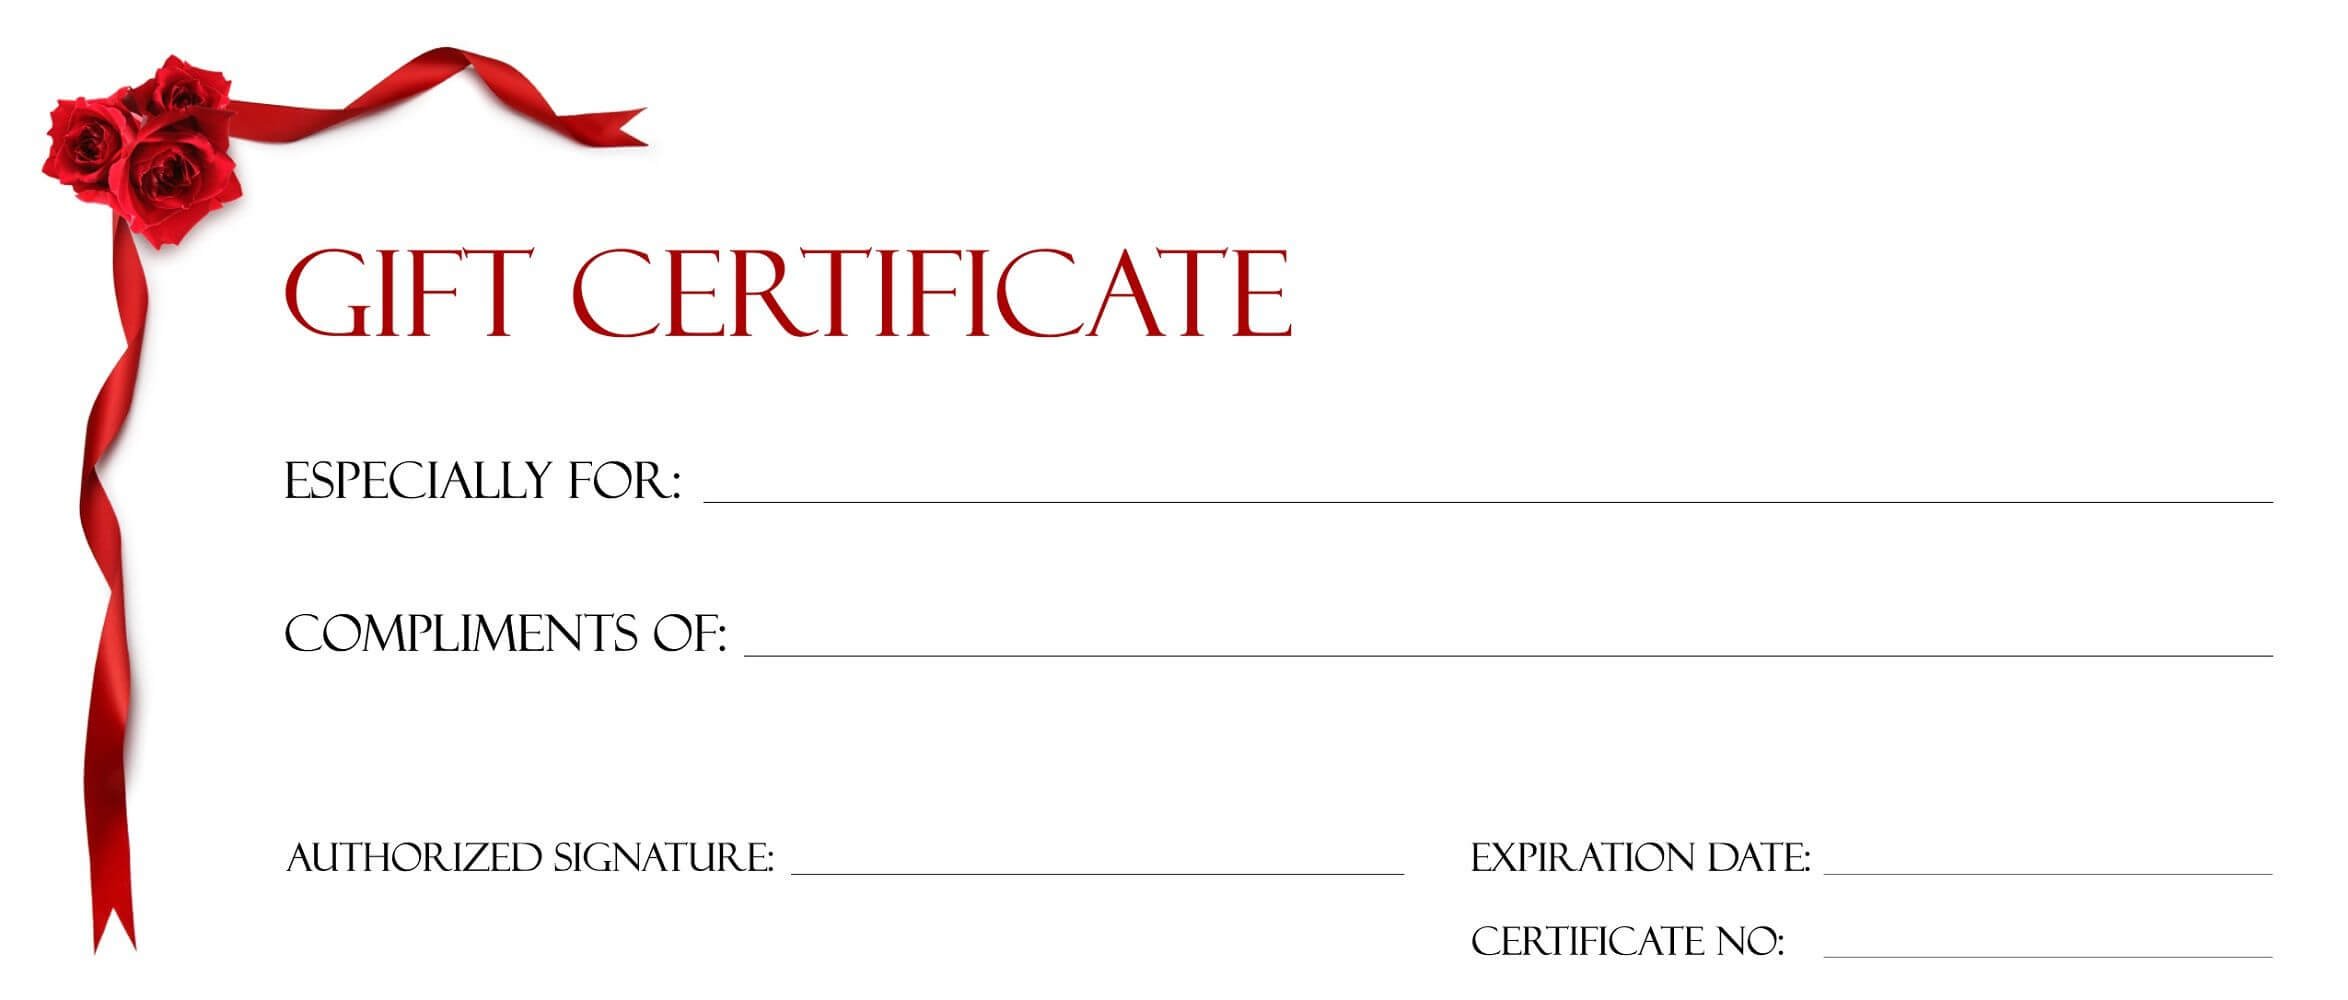 Gift Certificate Templates To Print | Gift Certificate Within Publisher Gift Certificate Template